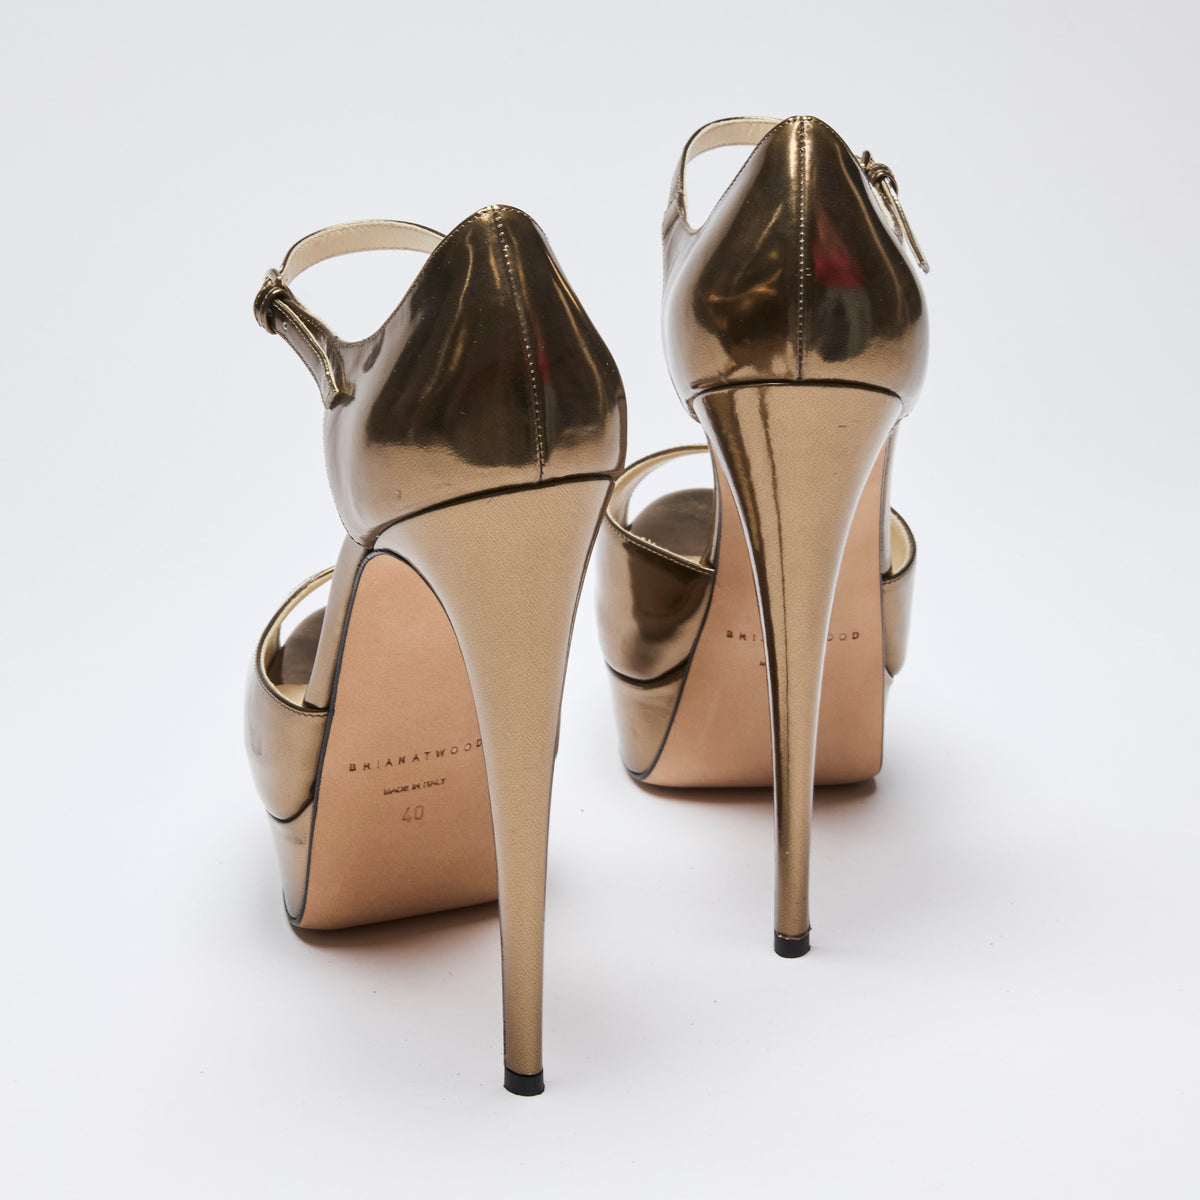 Excellent Pre-Loved Gold Metallic Leather Platform Peep Toe Pumps with Ankle Strap.(back)